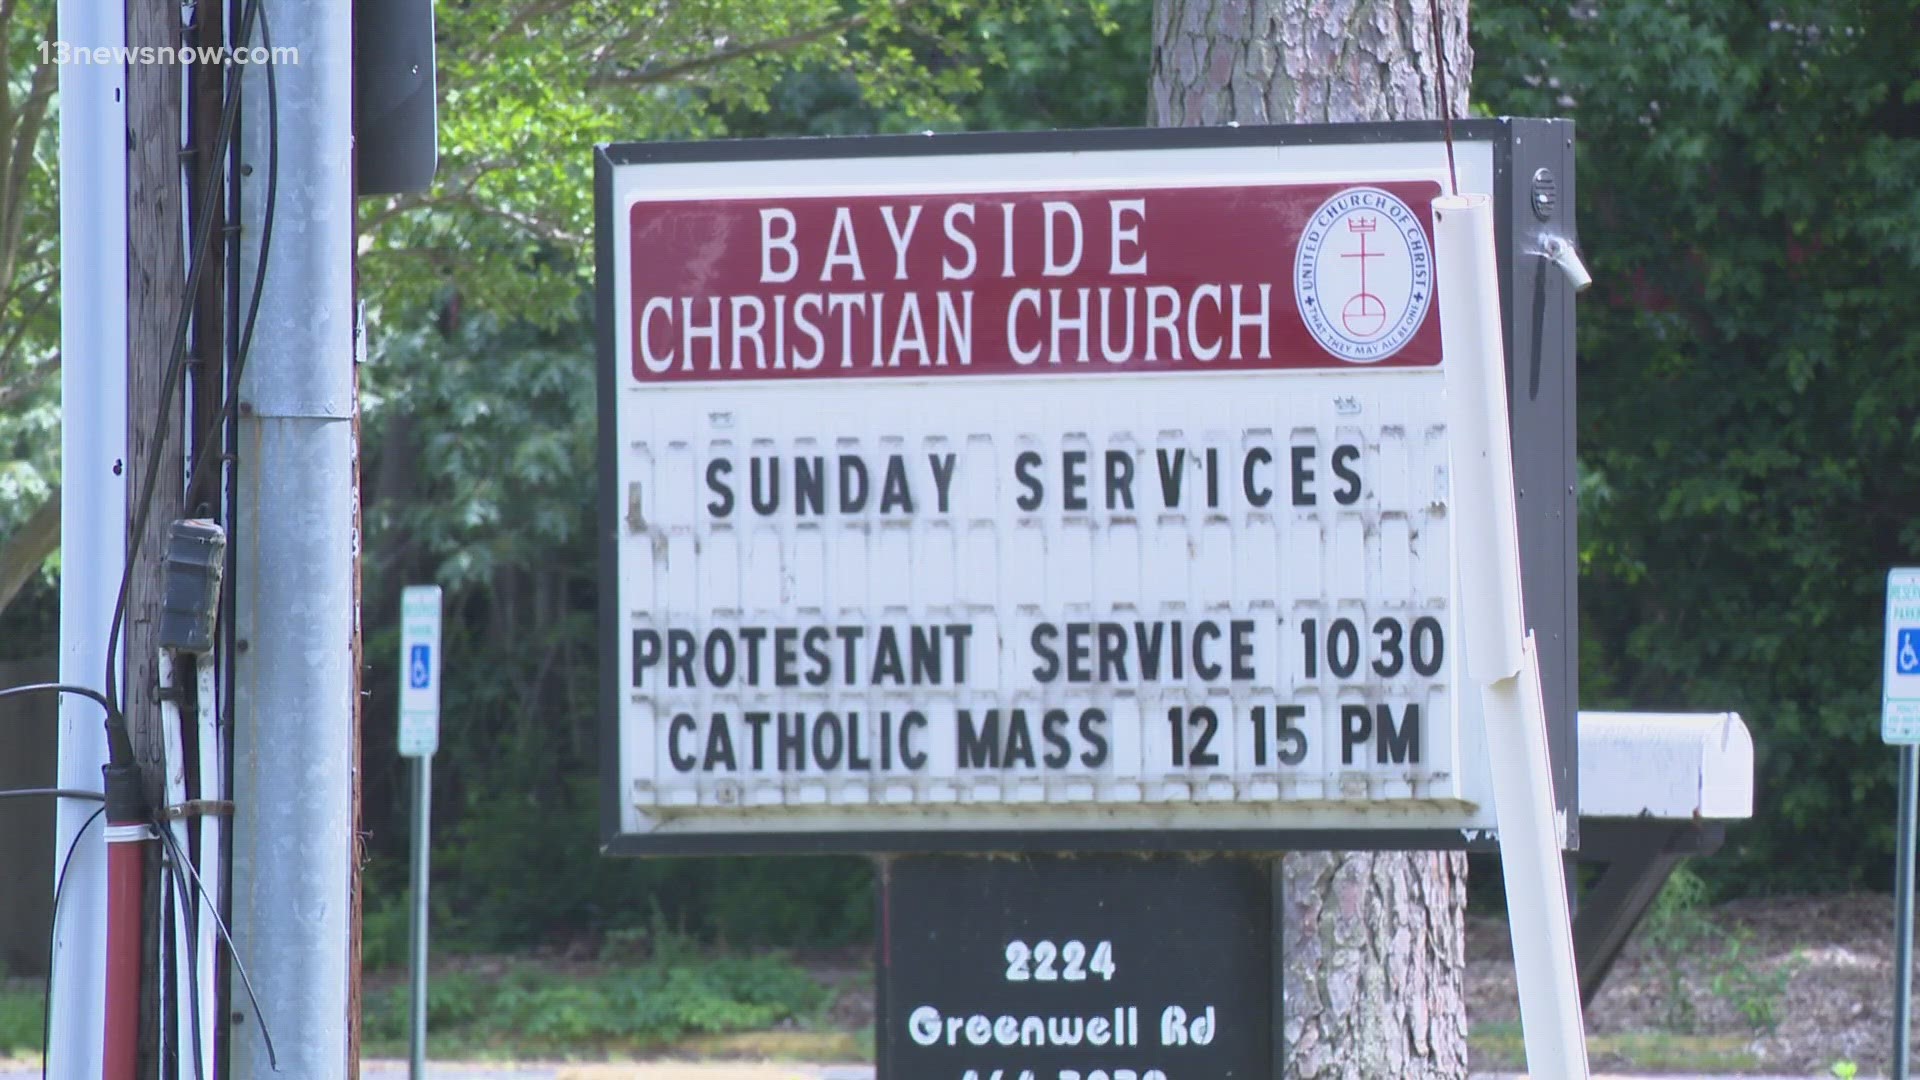 A person who has a relative enrolled at the Bayside Christian Children's Learning Center told 13News Now that they found a toddler alone on an outside playground.